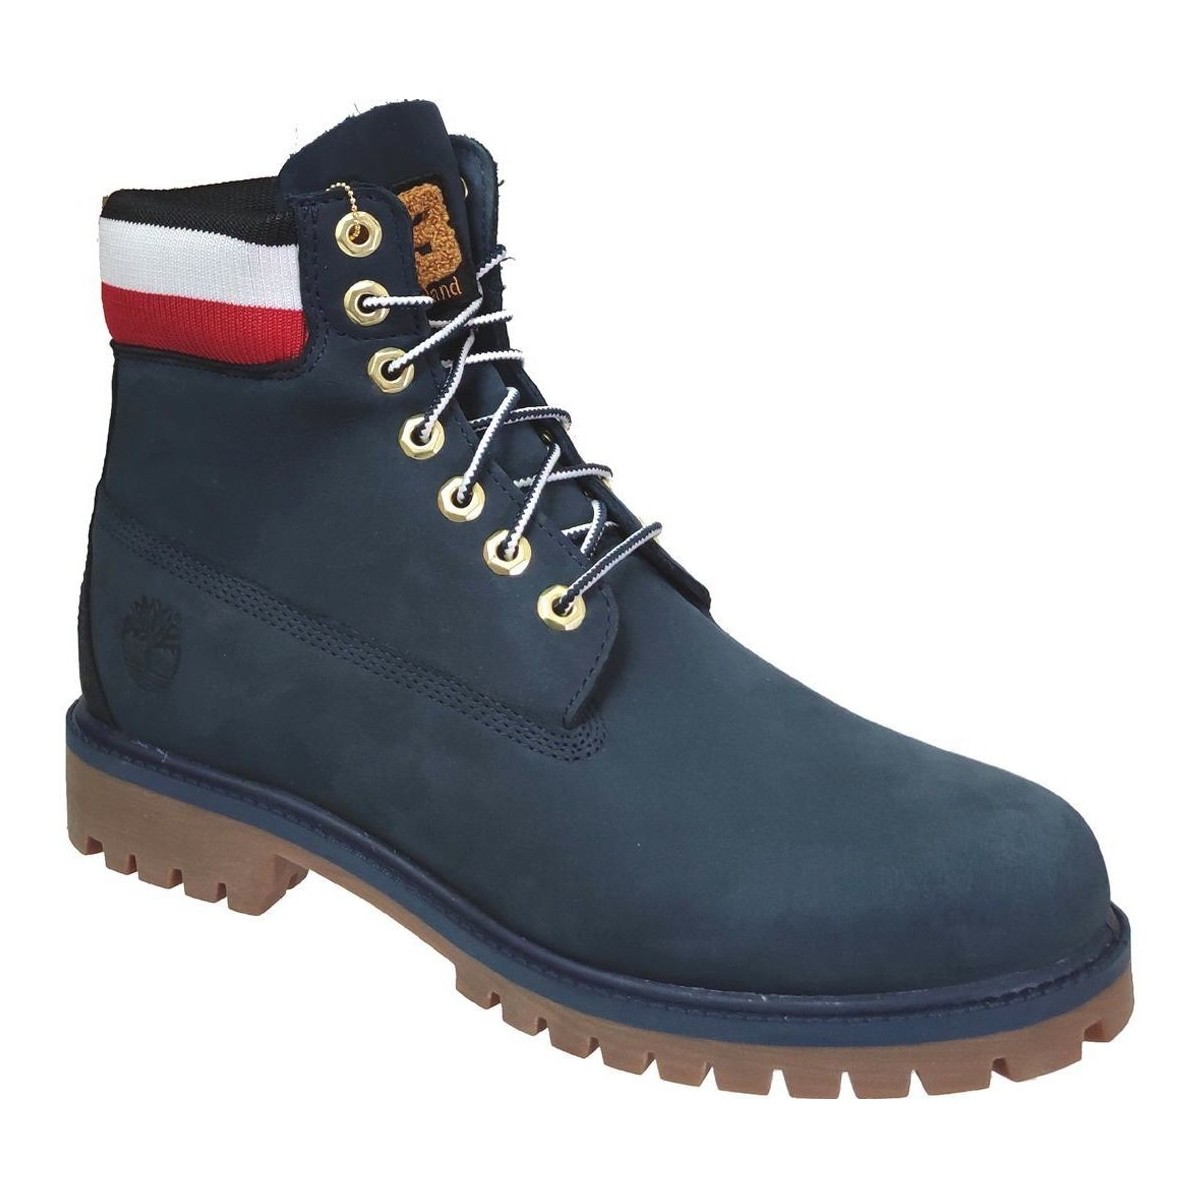 Chaussures Homme Boots Timberland Heritage 6 in Bleu